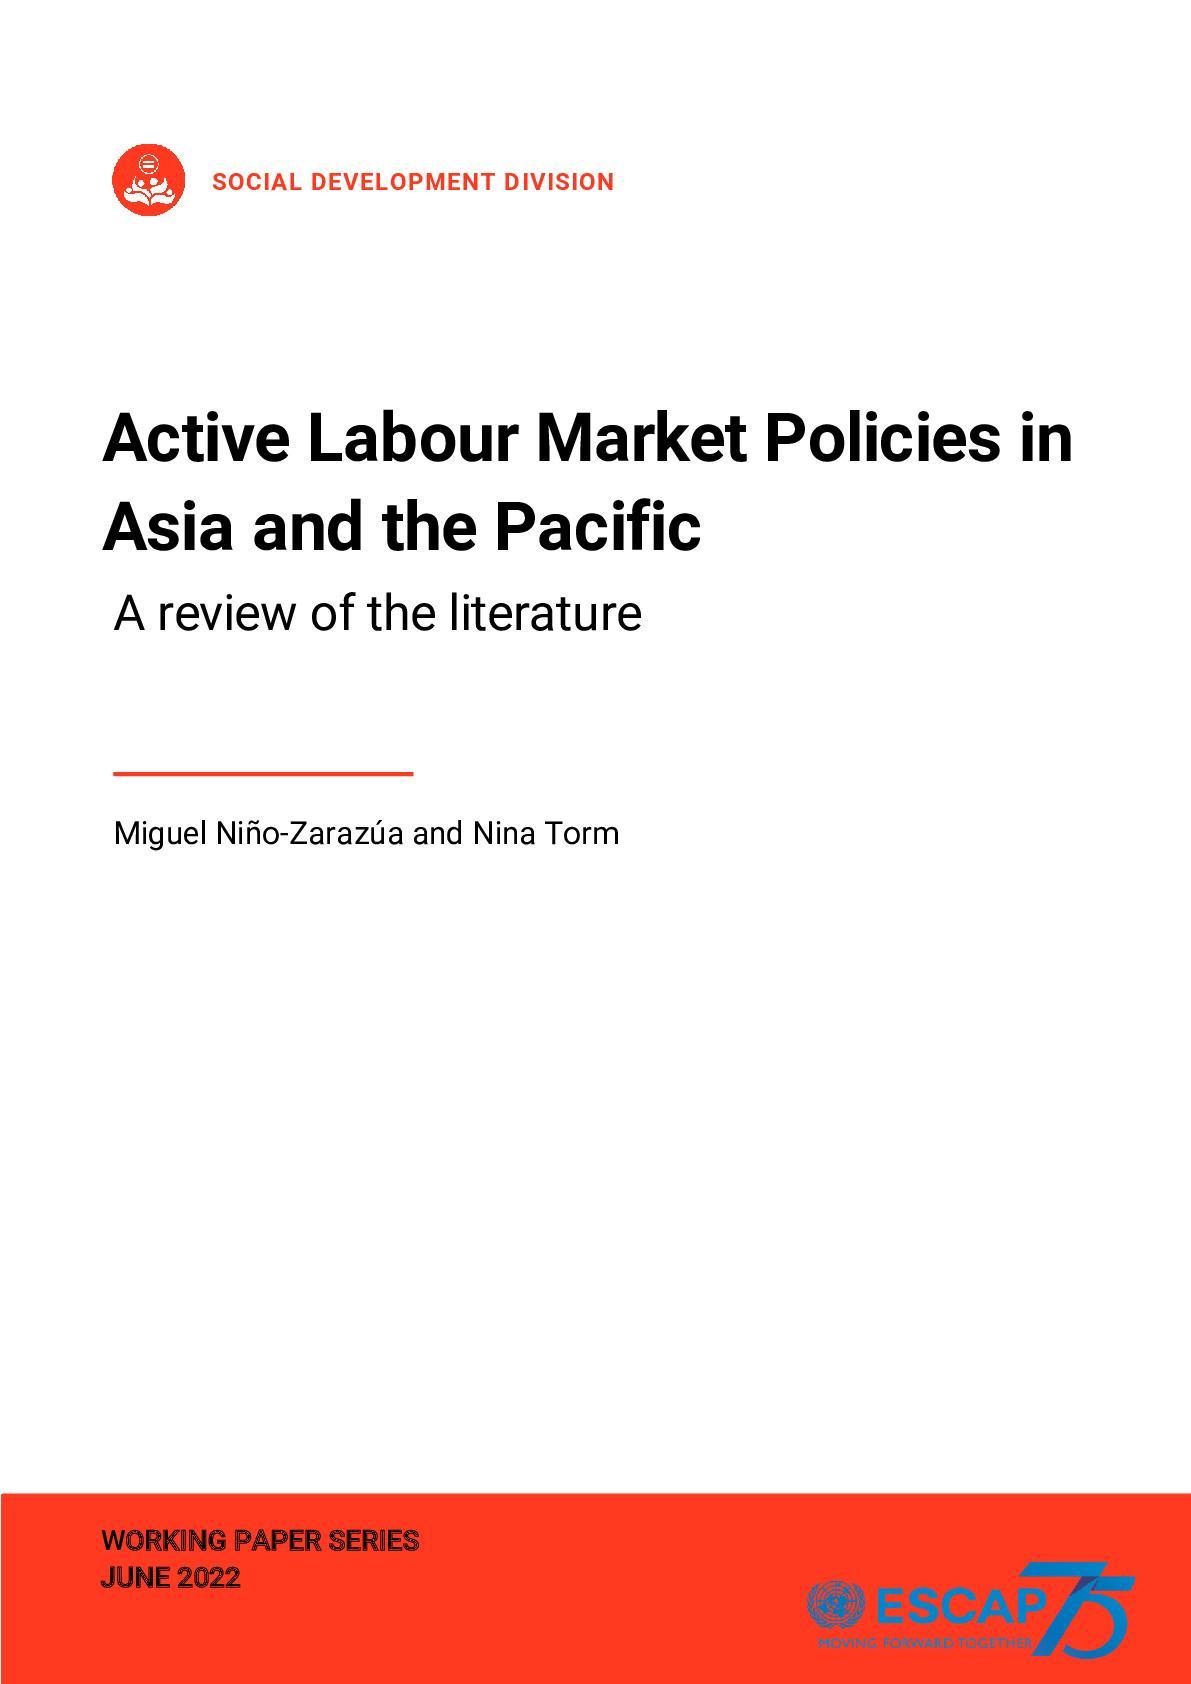 Active labour market policies in Asia and the Pacific